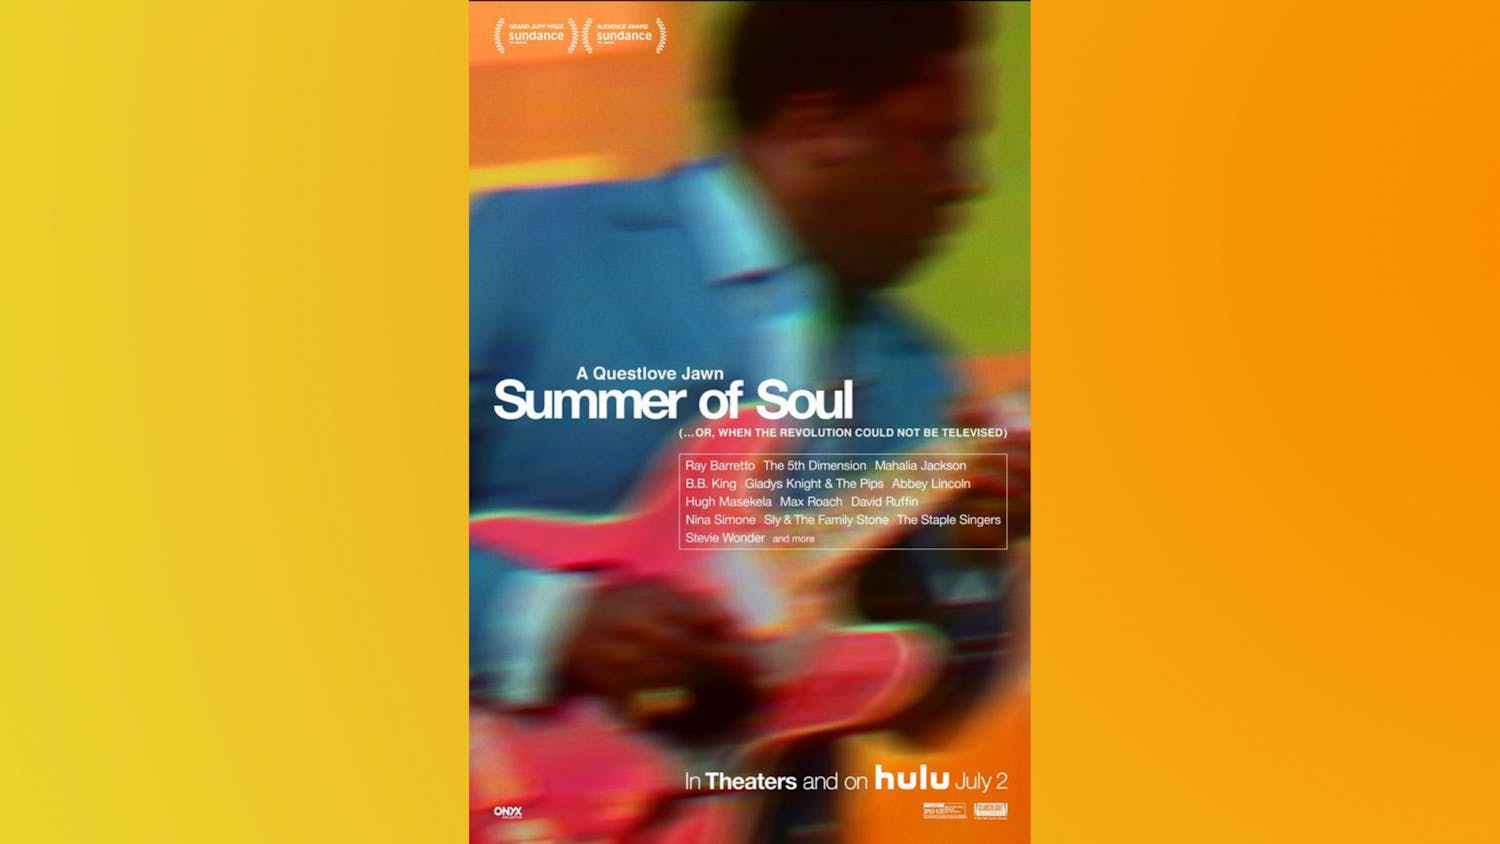 Ahmir “Questlove” Thompson’s film directorial debut “Summer of Soul (...Or, When the Revolution Could Not Be Televised)” had a limited theatrical release in the U.S. on June 25 and expanded a week later to theaters and on Hulu. (Movie poster retrieved from IMDb)